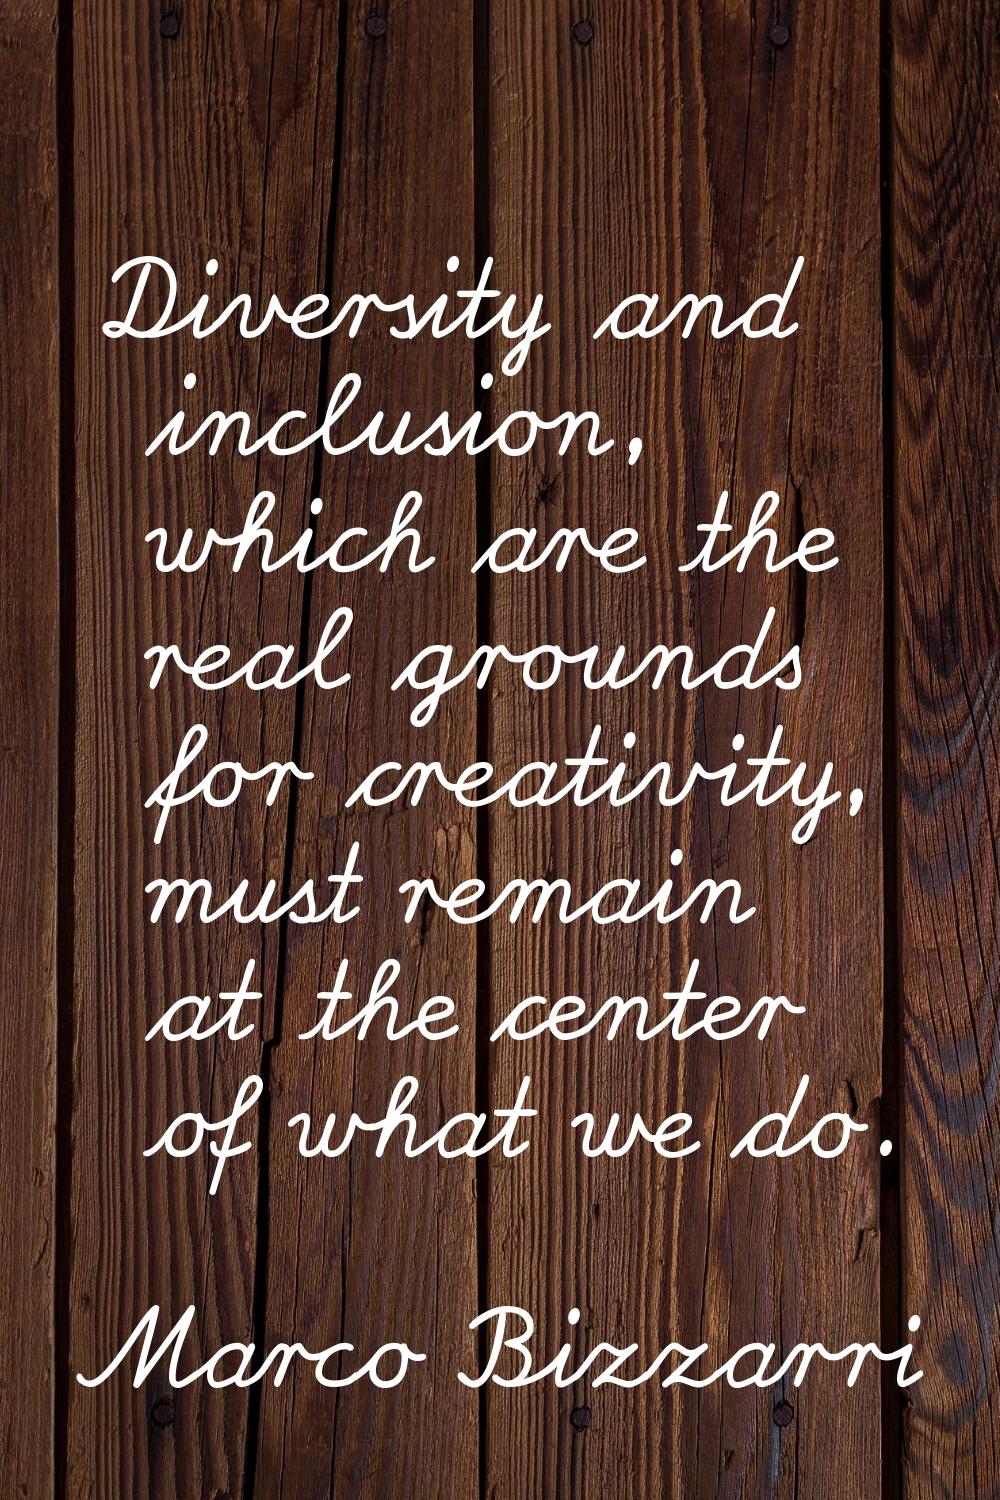 Diversity and inclusion, which are the real grounds for creativity, must remain at the center of wh